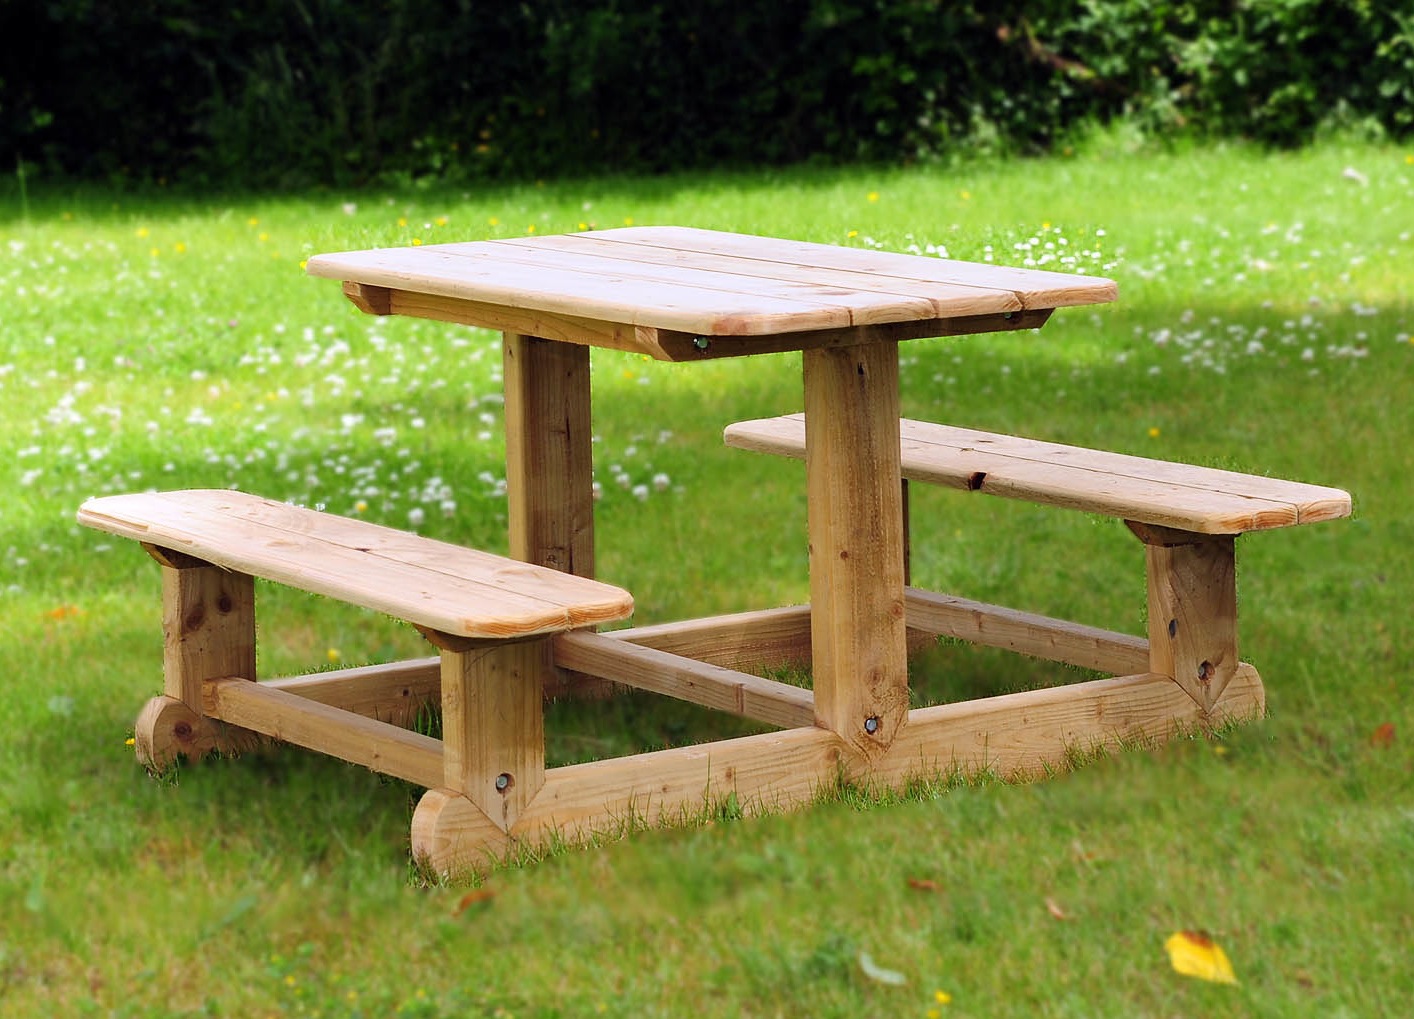 Picking the perfect garden table